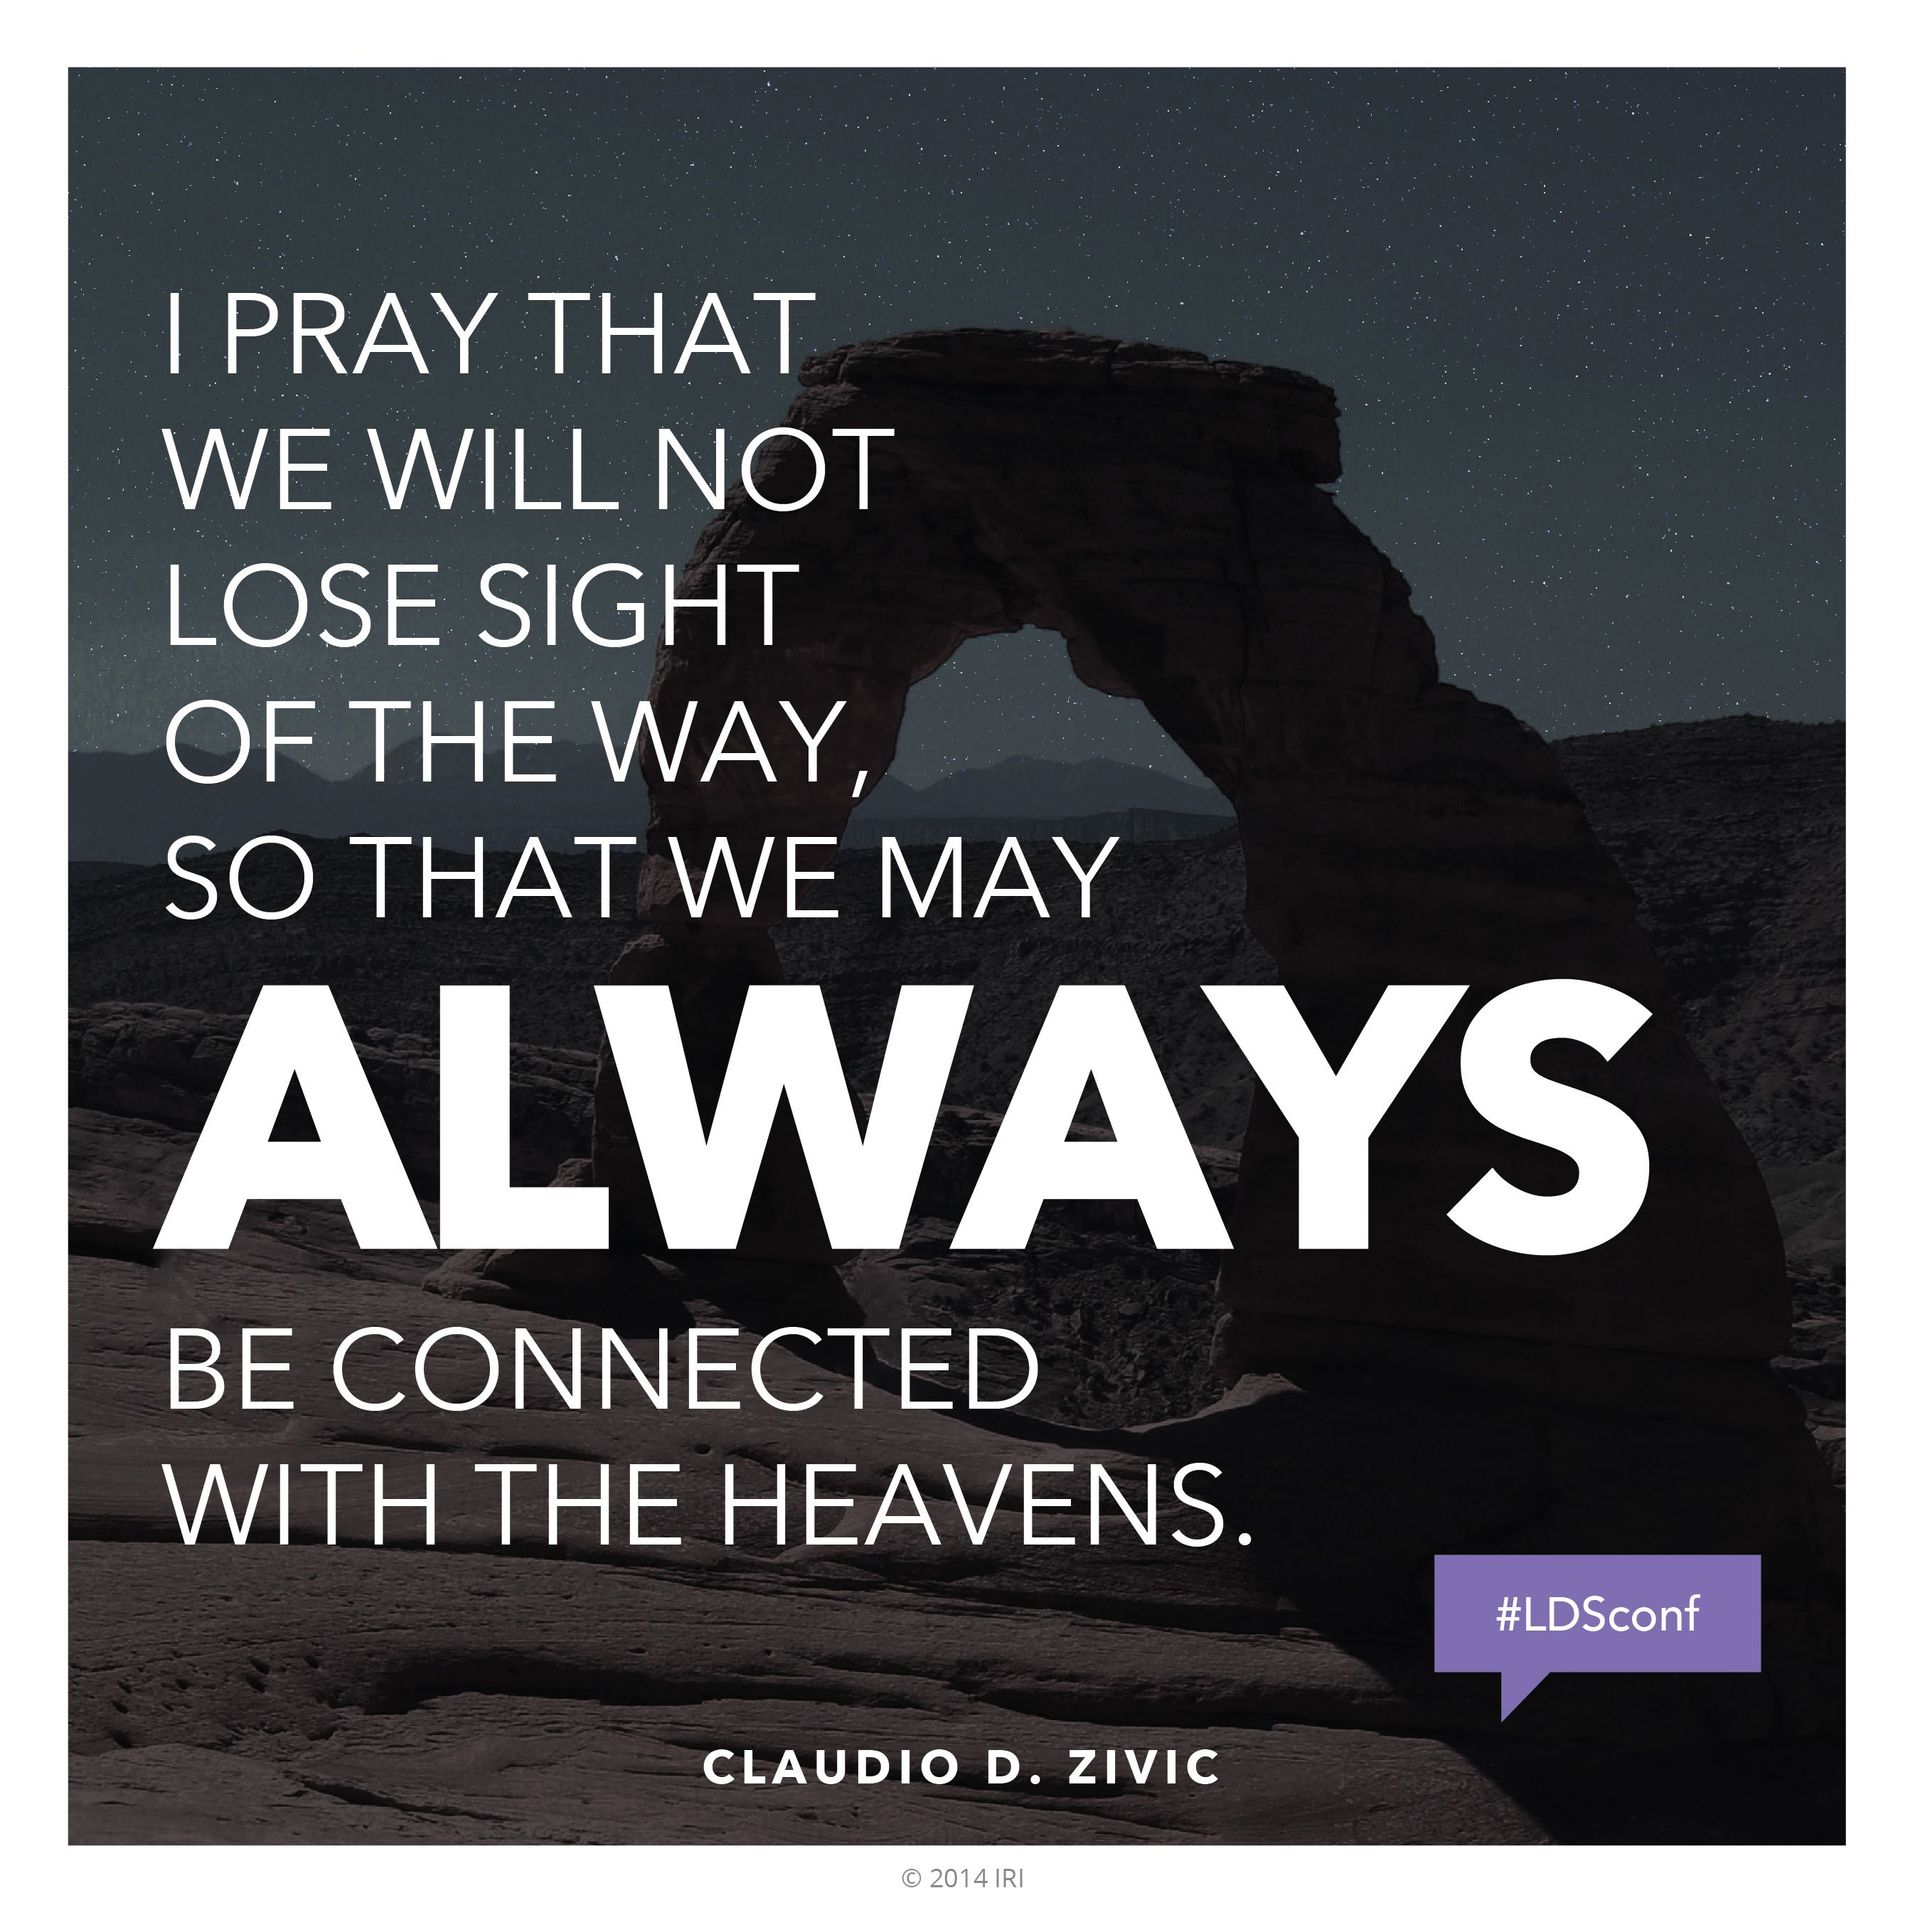 “I pray that we will not lose sight of the way, so that we may always be connected with the heavens.”—Elder Claudio D. Zivic, “Let’s Not Take the Wrong Way” © undefined ipCode 1.